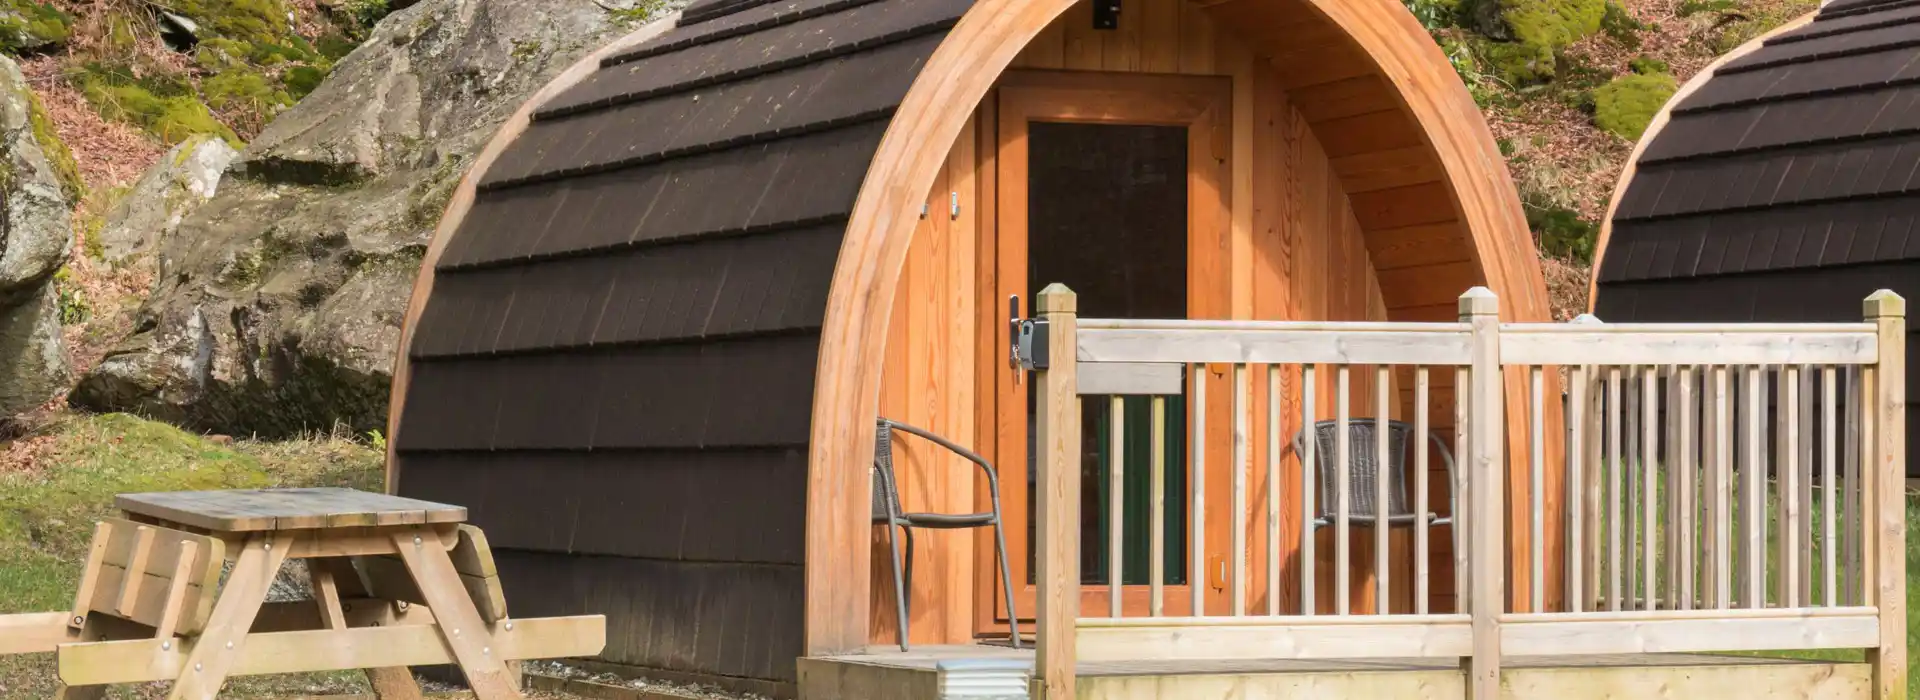 Stirling camping and glamping pods